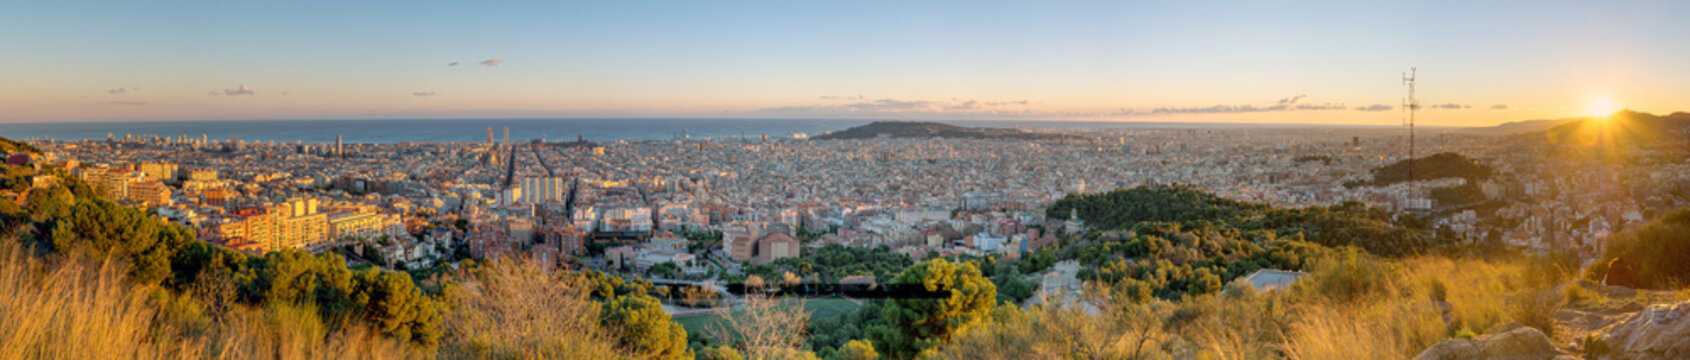 Panorama of Barcelona from Mount Tibidabo at sunset